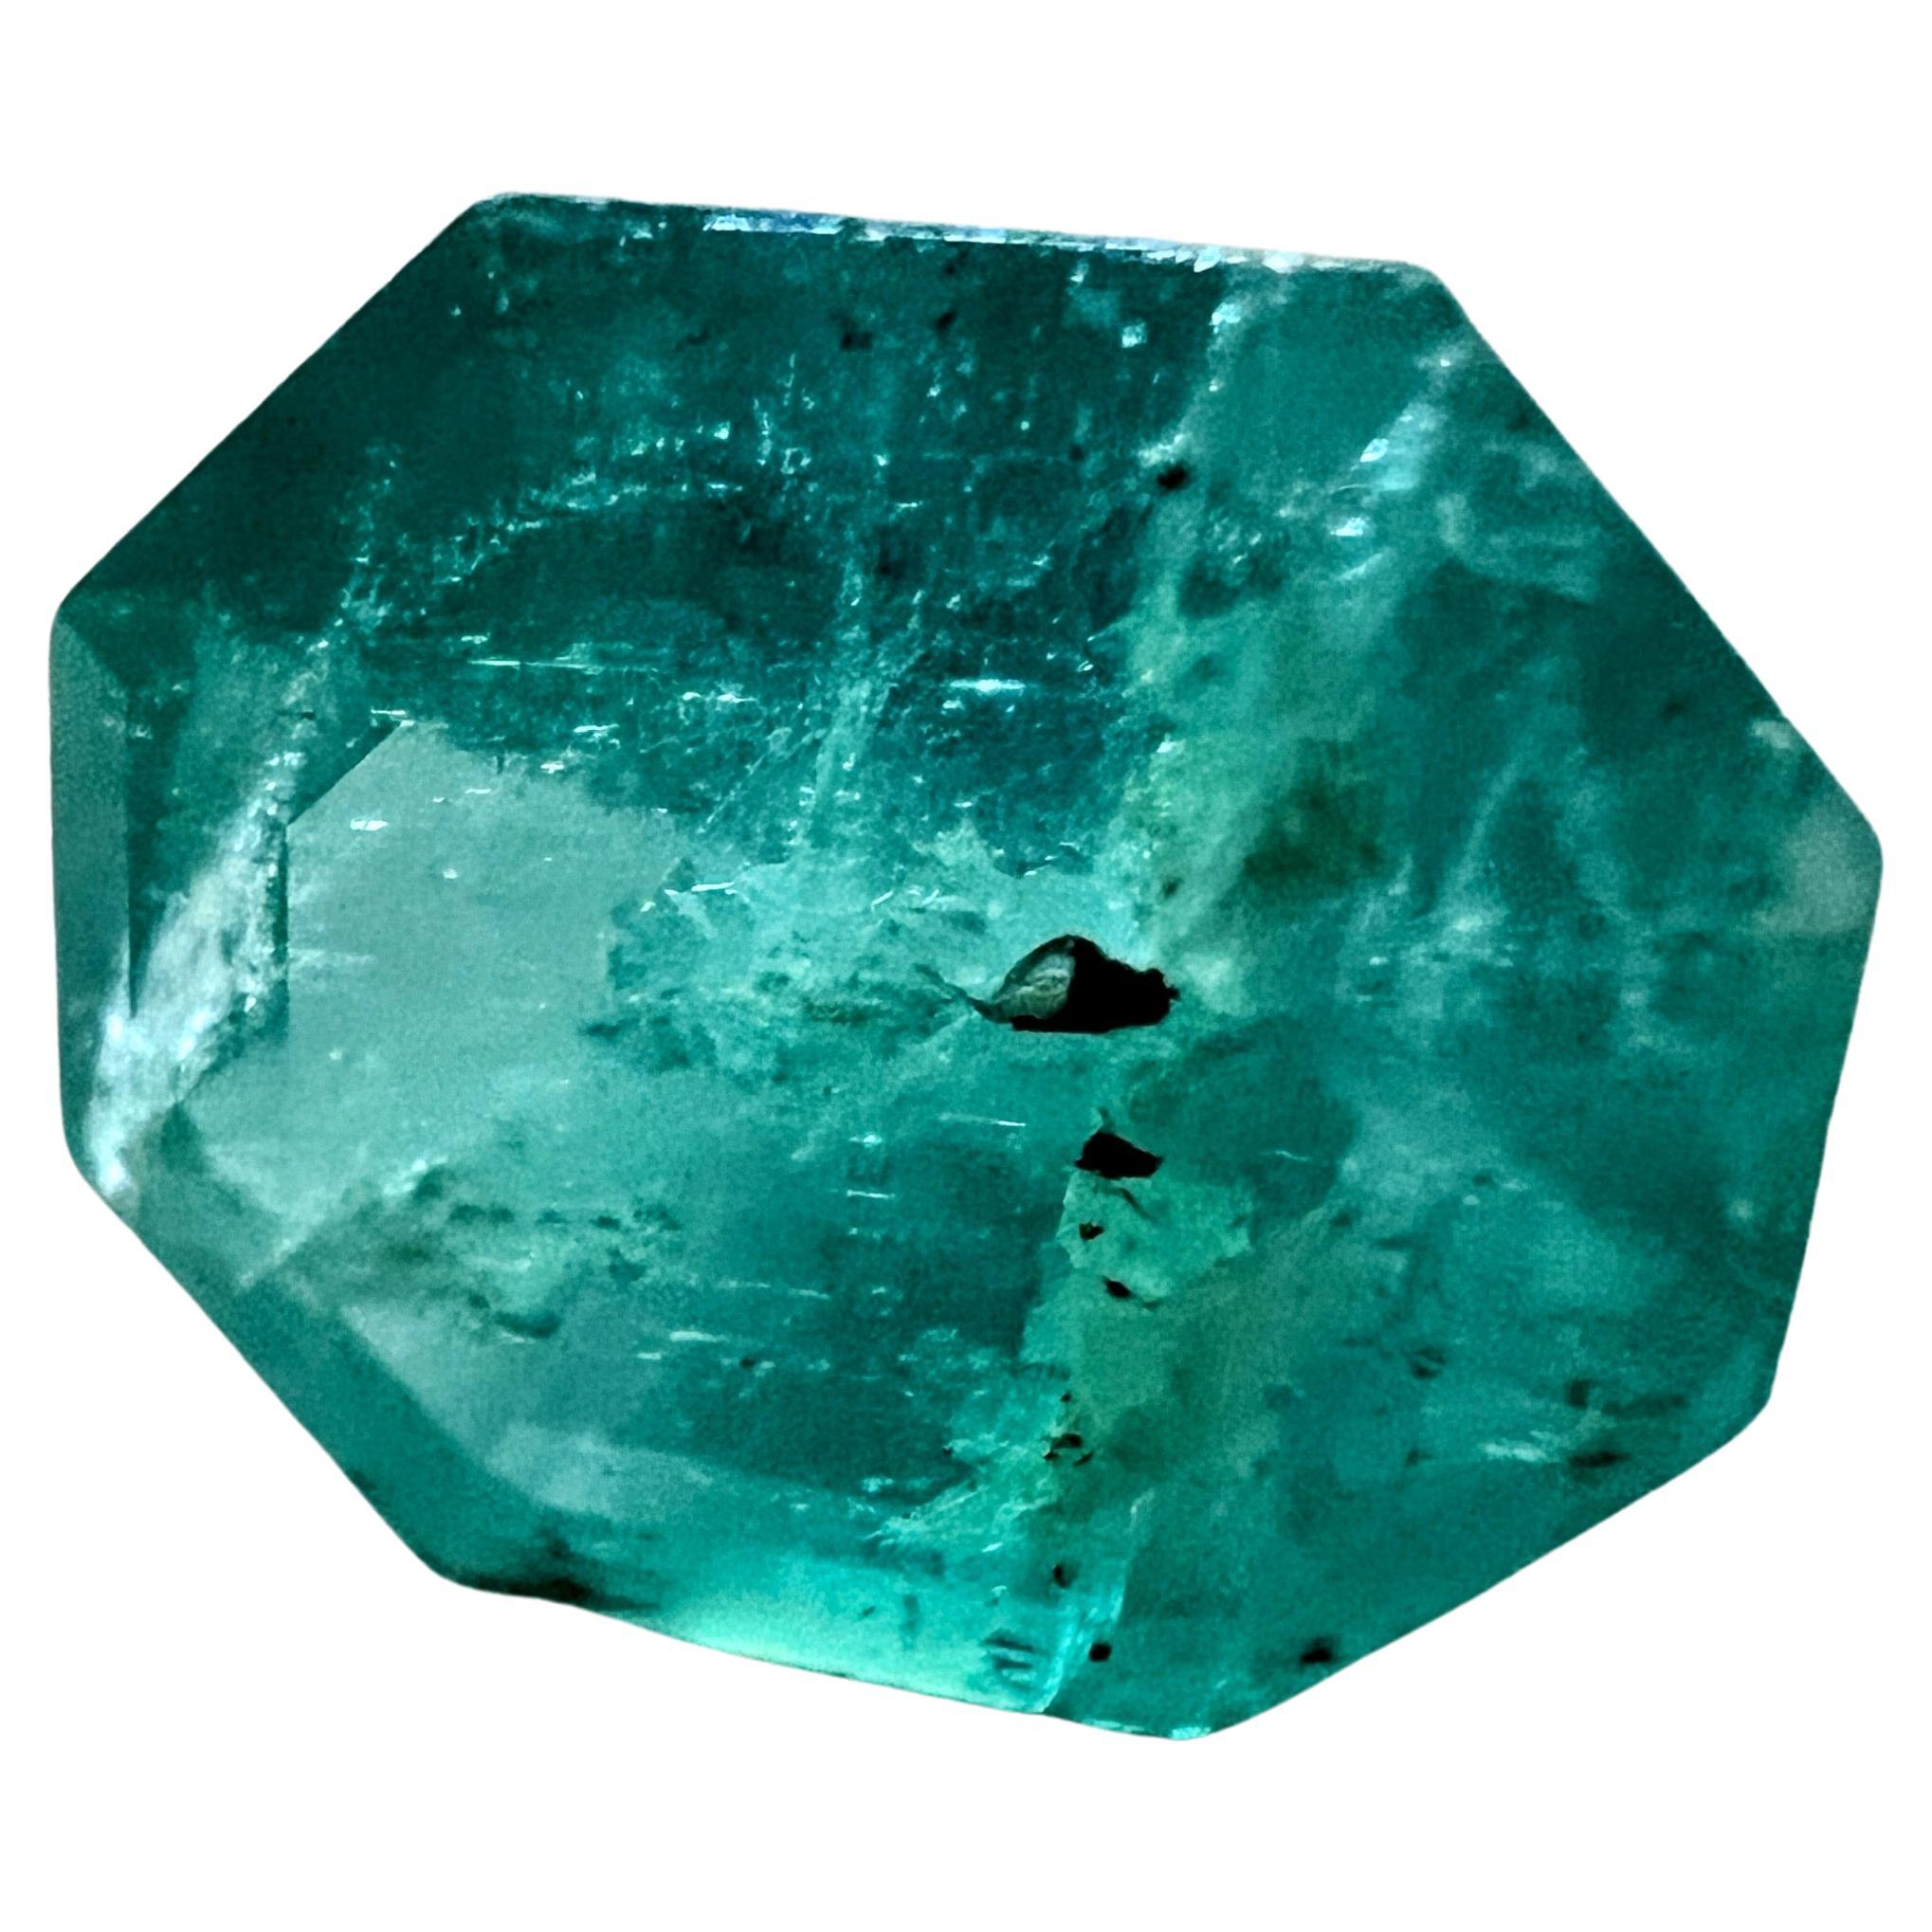 Unveil Exquisite Beauty with the 2.02ct Octagonal Cut No-Oil 100% Natural Untreated Emerald Loose Gemstone. This extraordinary non-oiled gem captures the essence of authenticity, boasting a captivating color, clarity, and size that is poised to